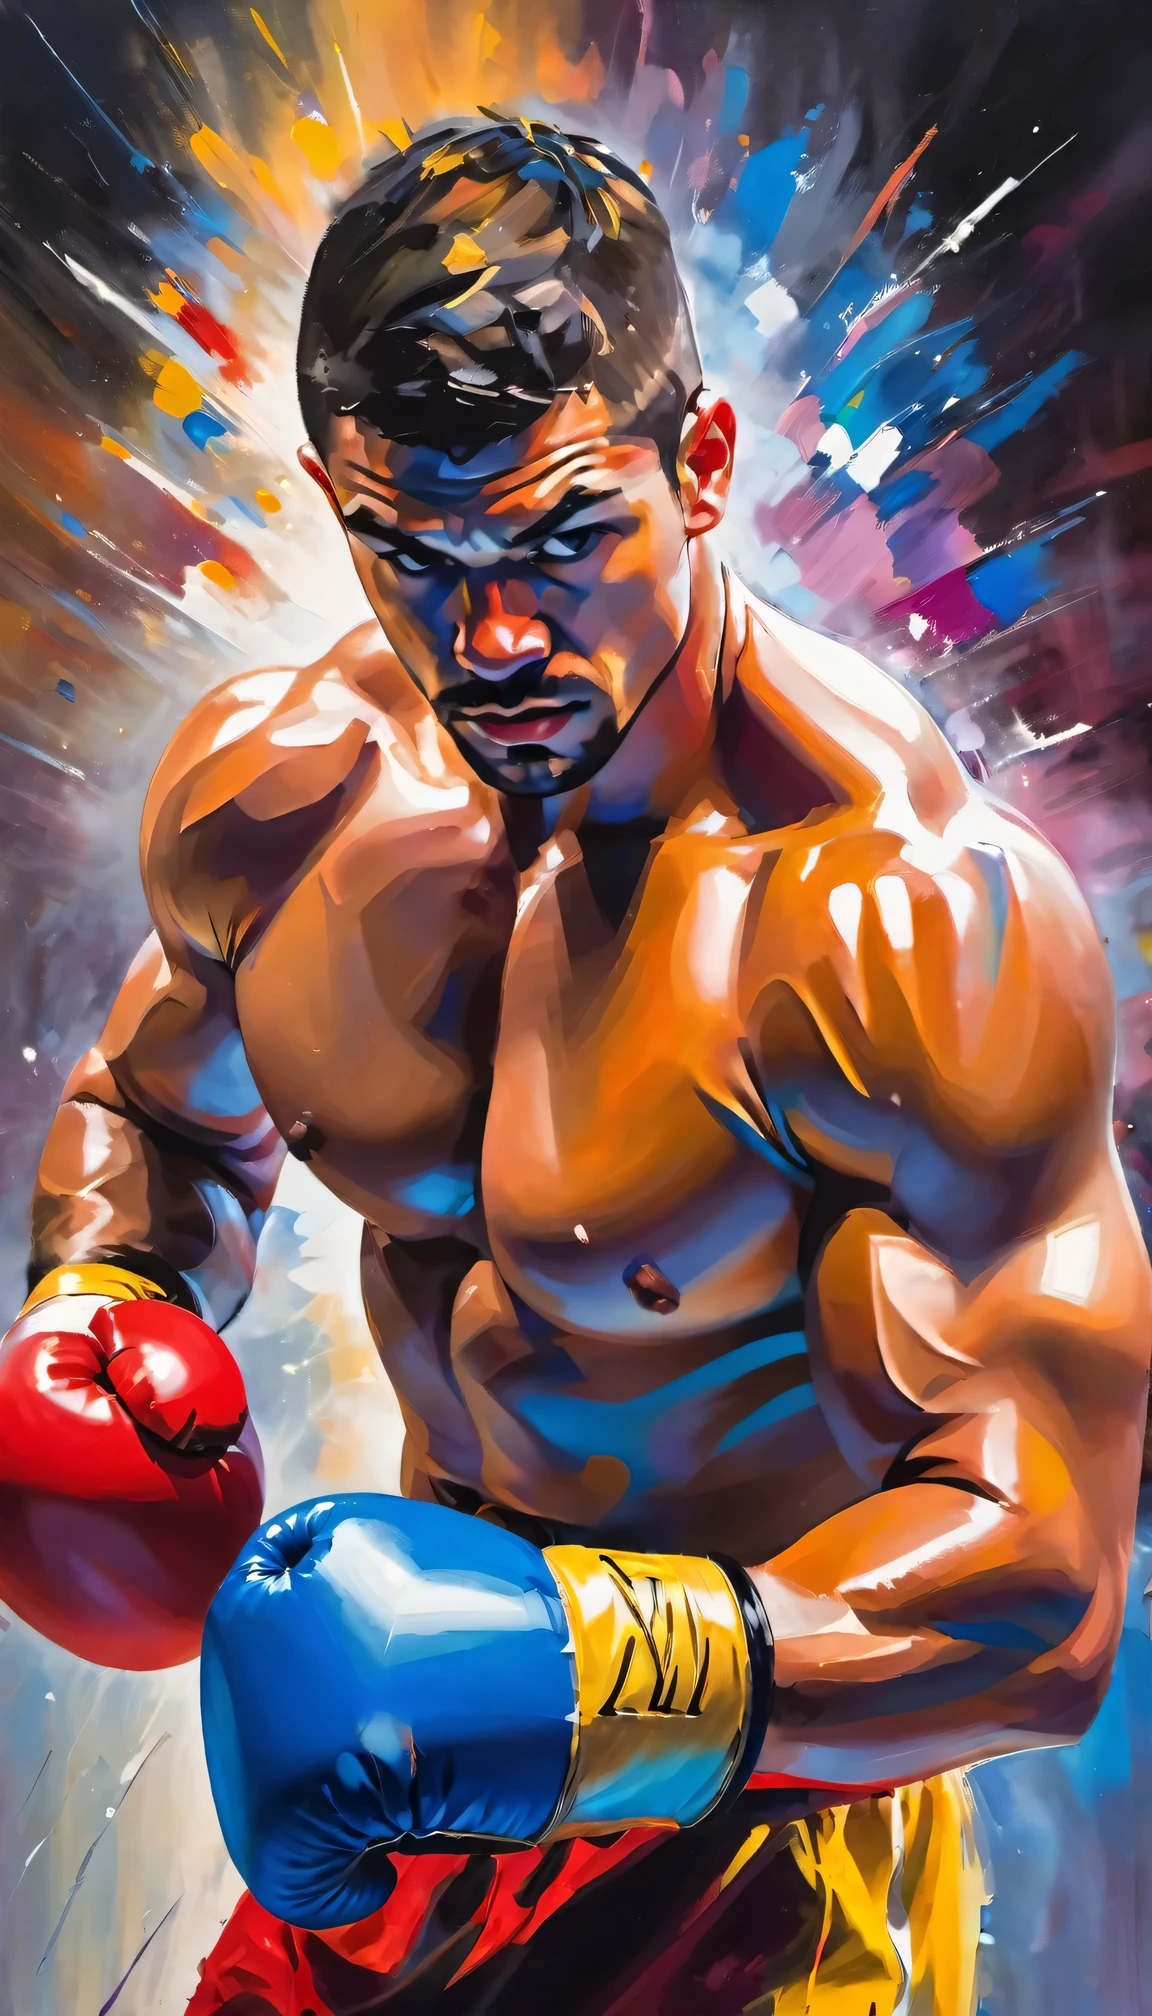 impressionist oil painting,boxer is preparing for the match,preparing for the fight,athletic build,strong muscles,concentration,fierce determination,sweat pouring down face,intense gaze,rippling muscles,impressive physique,rippling muscles,boxing gloves,boxing shorts,tiger-striped face paint,perfectly toned body,boxing ring,spotlight,energetic atmosphere,dynamic brushstrokes,brilliant colors,vivid hues,soft and blended brushwork,transparent layers of paint,impressionistic style,copying the visible brushstrokes,blurred edges,abstract background,excitement building up,anticipation,electric energy,rhythmic movement,visual poetry,energetic brushstrokes,bold use of color,expressive and emotional impact.